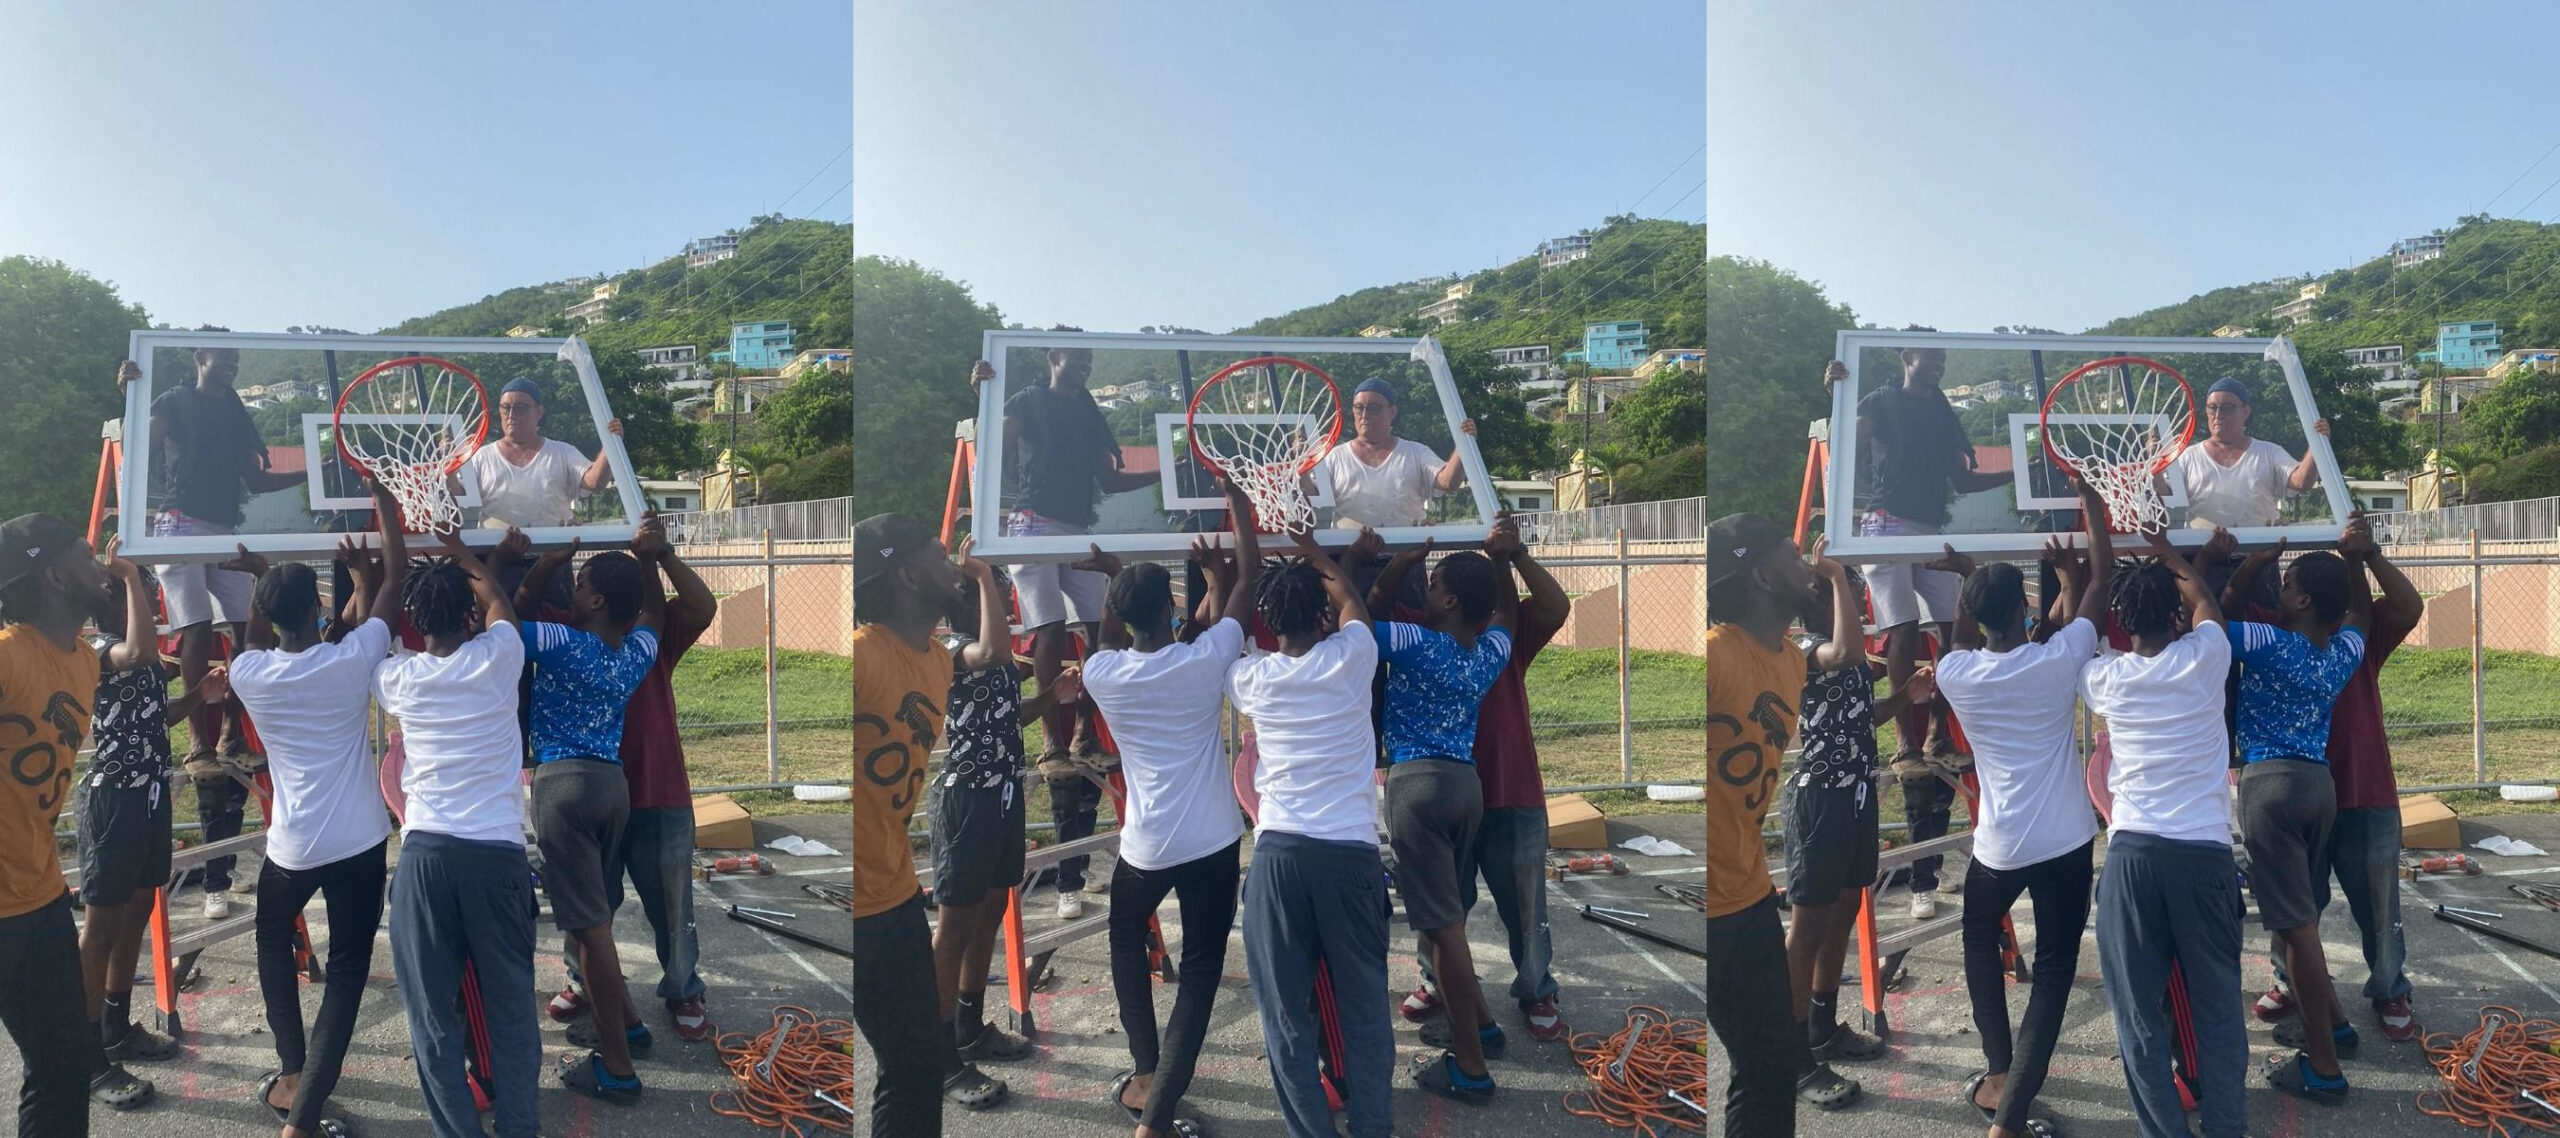 Community Action Group Secures DSPR Basketball Hoop For The Savan Area